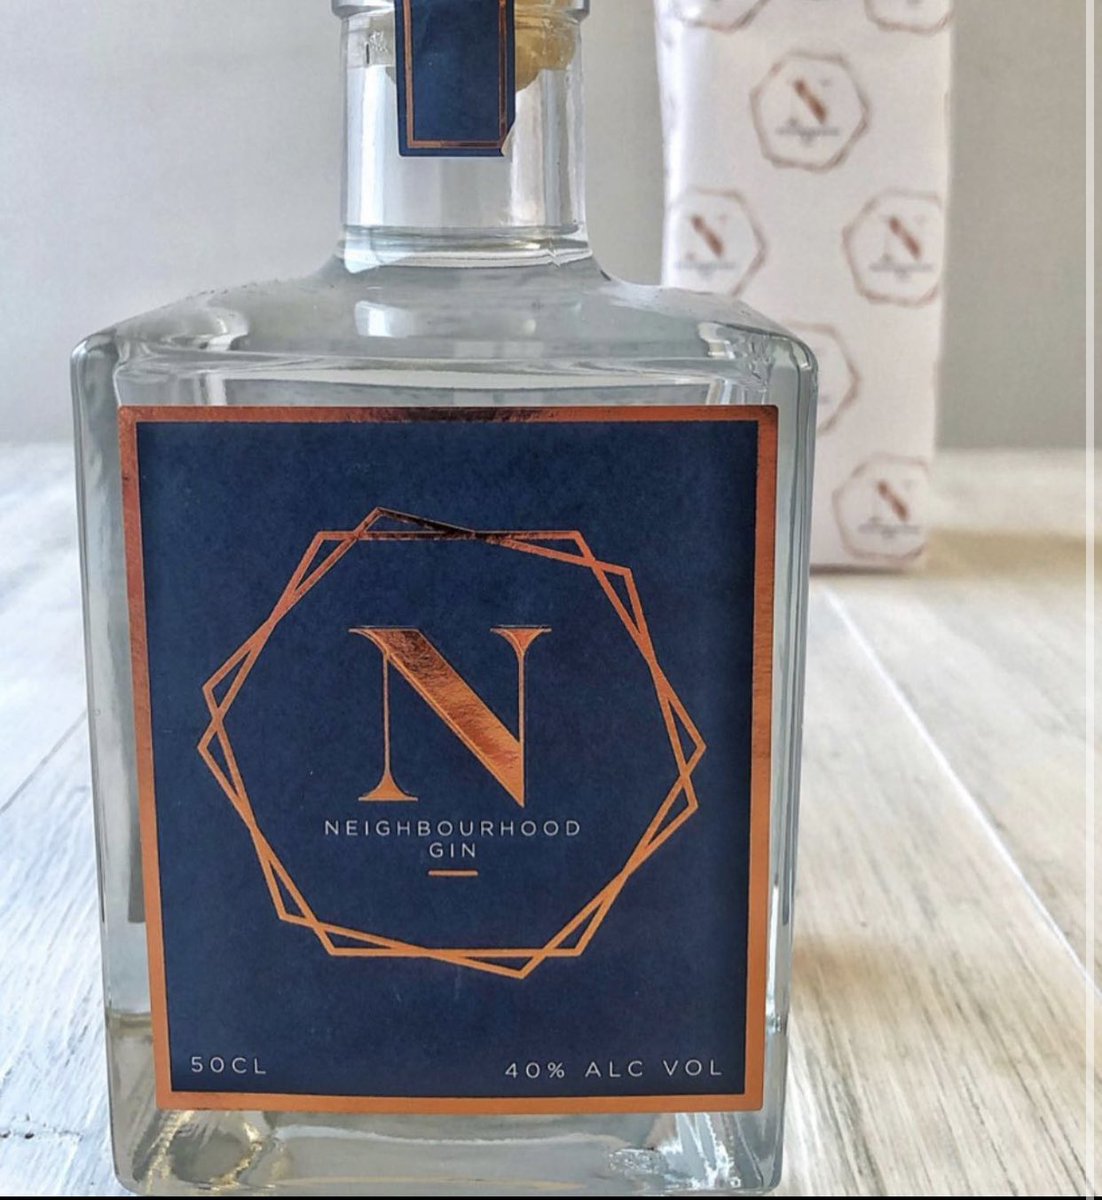 New products will be launching soon.. keep your eyes peeled!!! #gin #ginandtonic #craftgin #smallbatch #distillery #manchester #derbyshire #familybusiness #premiumgin #neighbourhoodgin #luxary #navyandcopper #ginlife #ginlovers #ginoftheday #ginofinstagram #sunday #sundayfunday